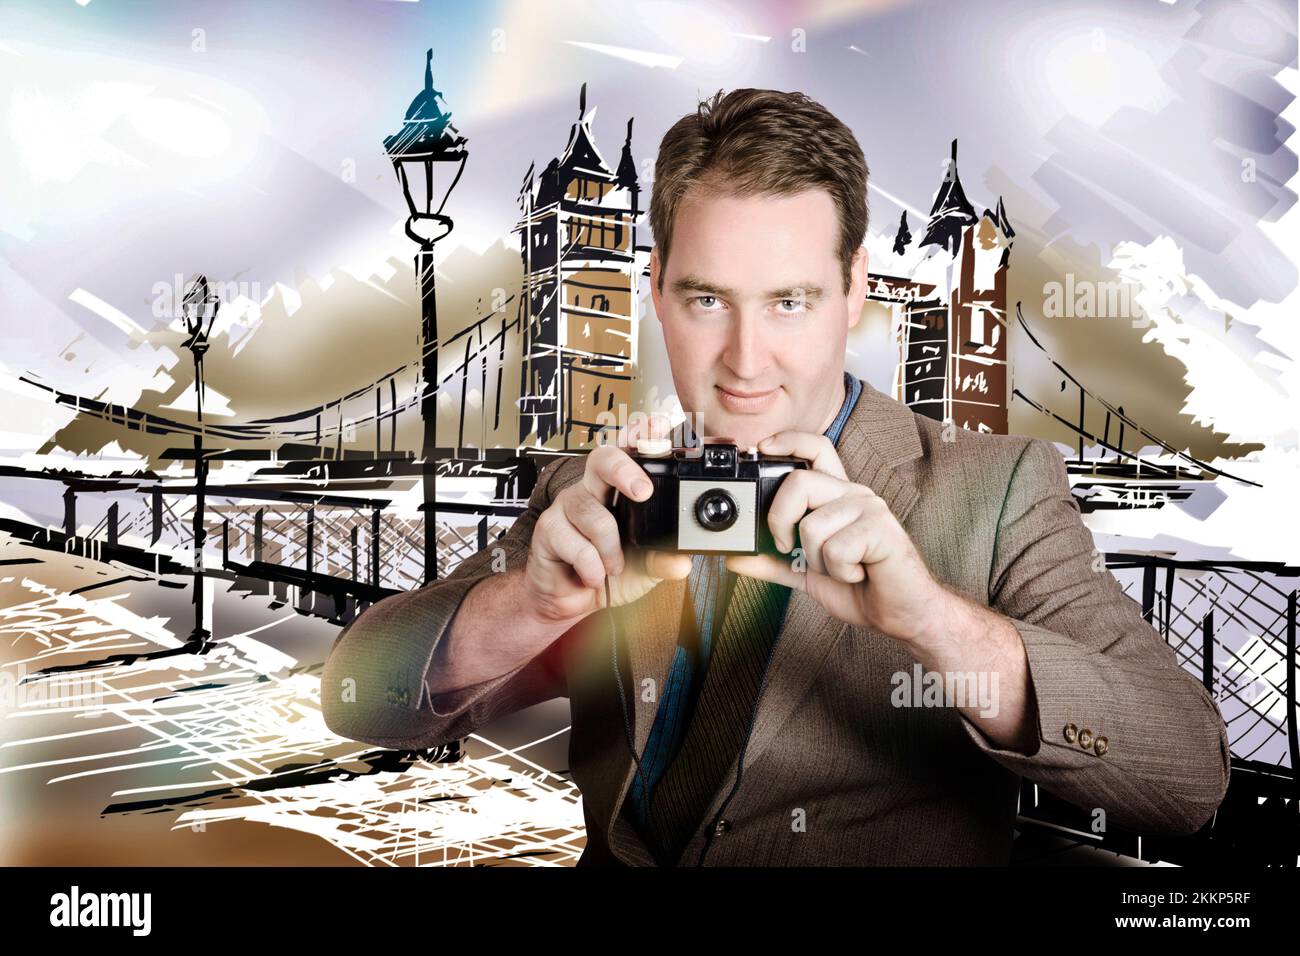 Photo illustration of a sightseeing person on vacation taking photograph with retro camera at London vacation destination Stock Photo